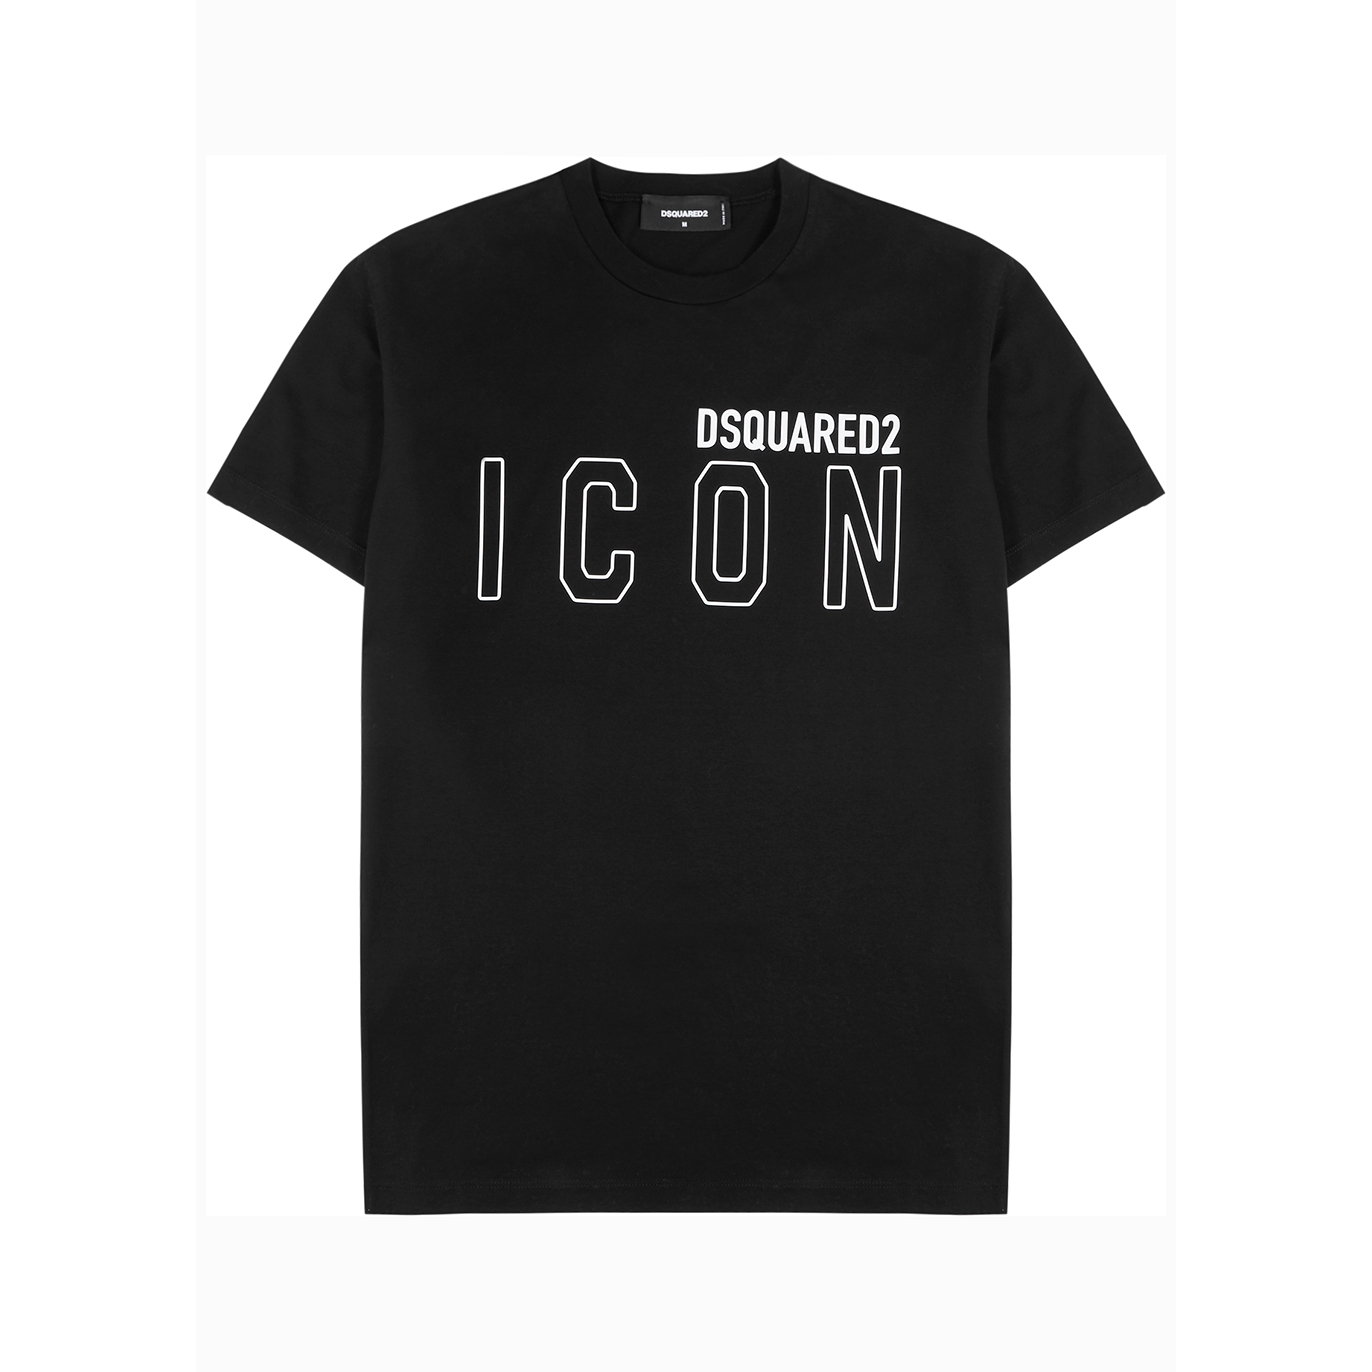 DSQUARED2 ICON PRINTED COTTON T-SHIRT